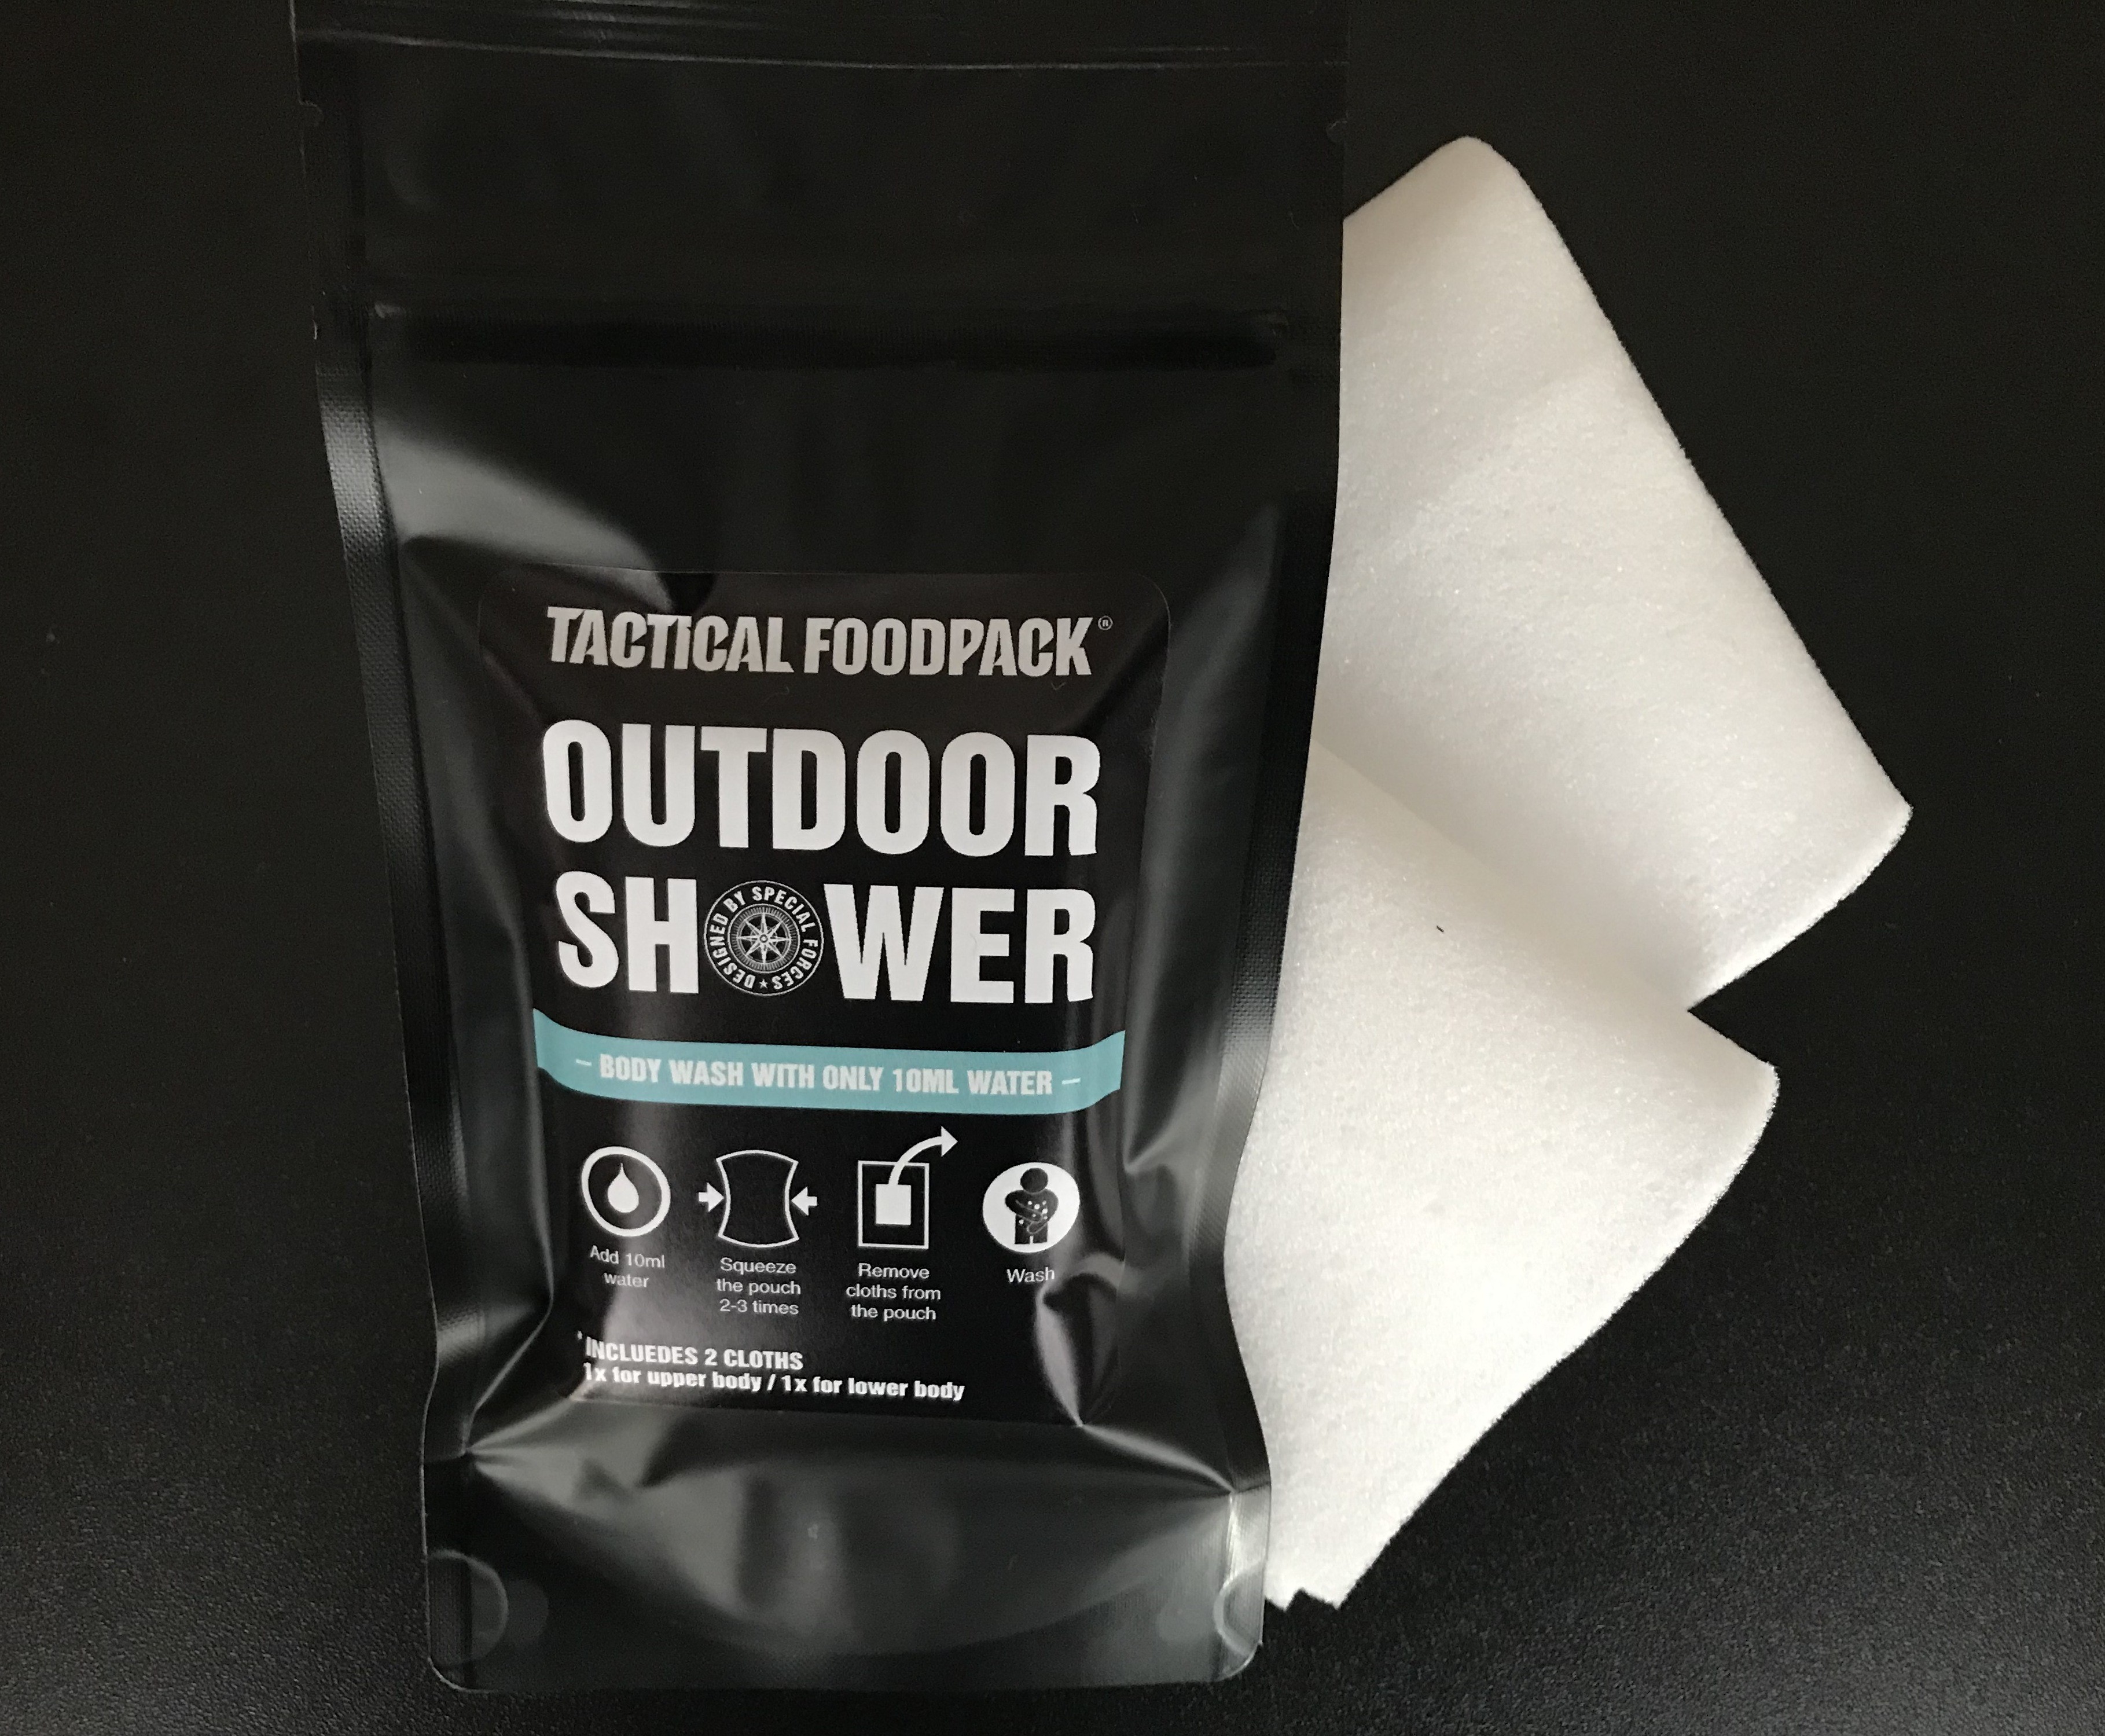 Tactical Foodpack Shower Outdoor Camping Military Dusche Hygiene 